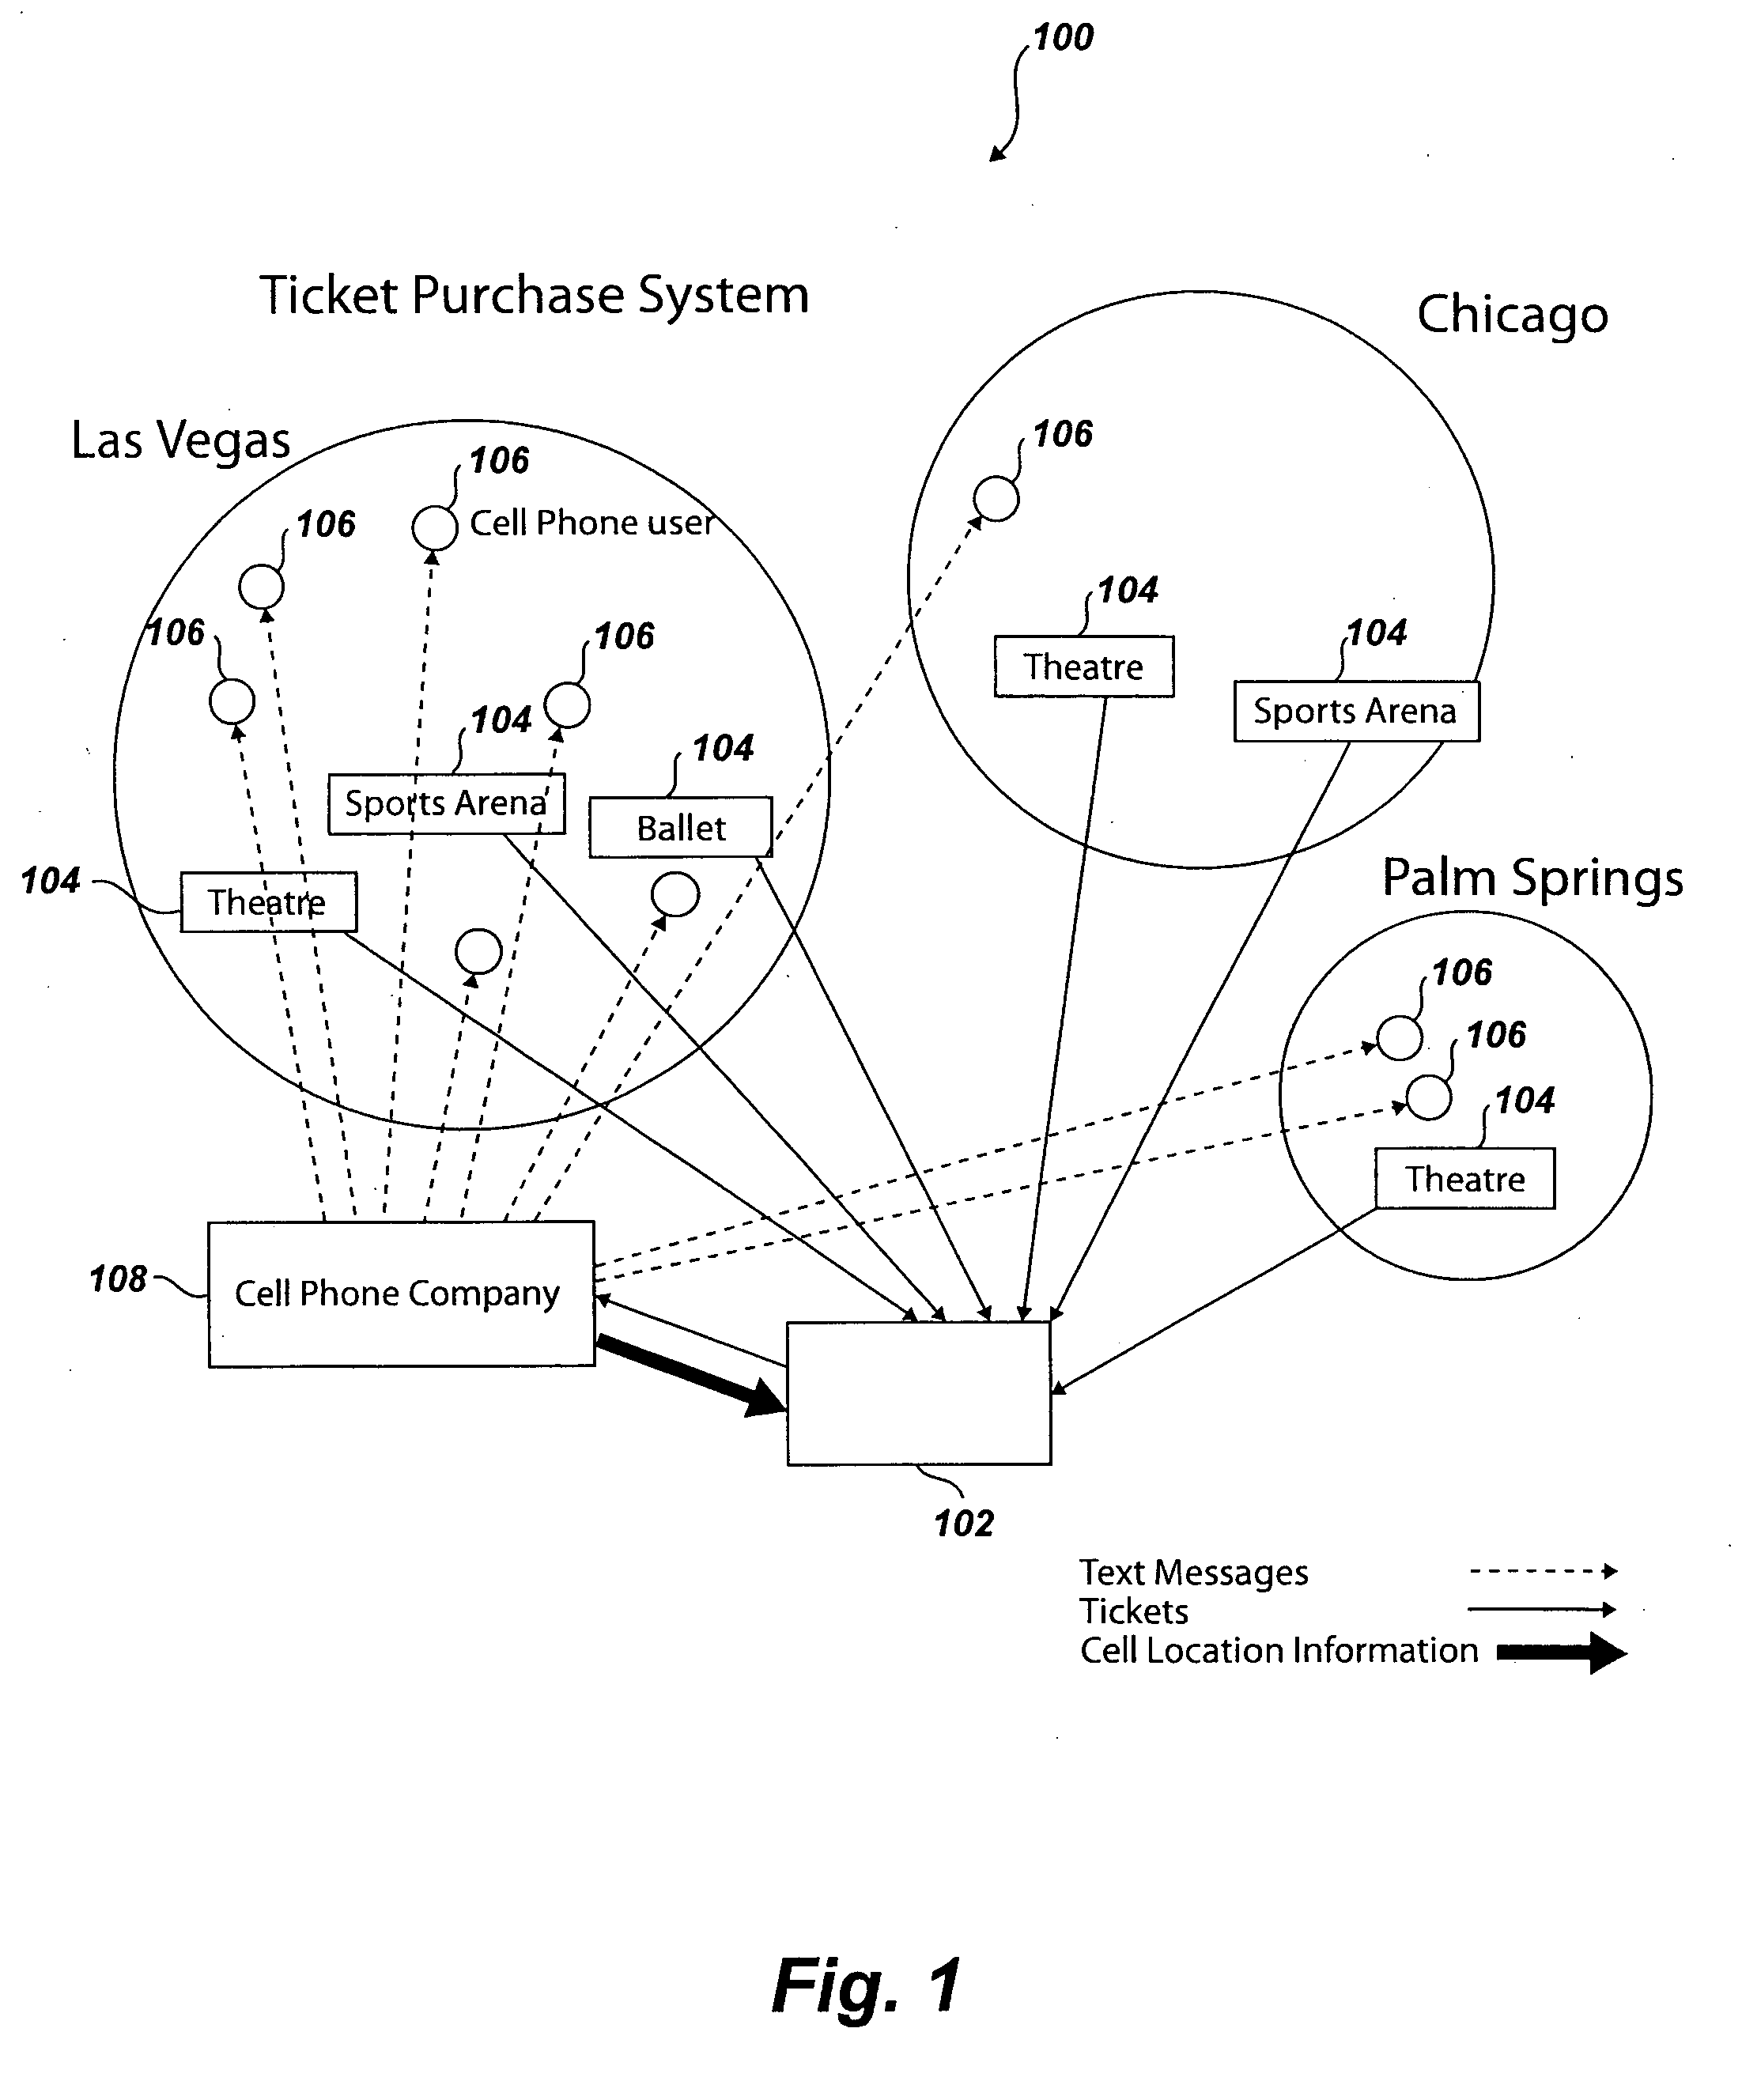 Integrated reservation and ticketing system